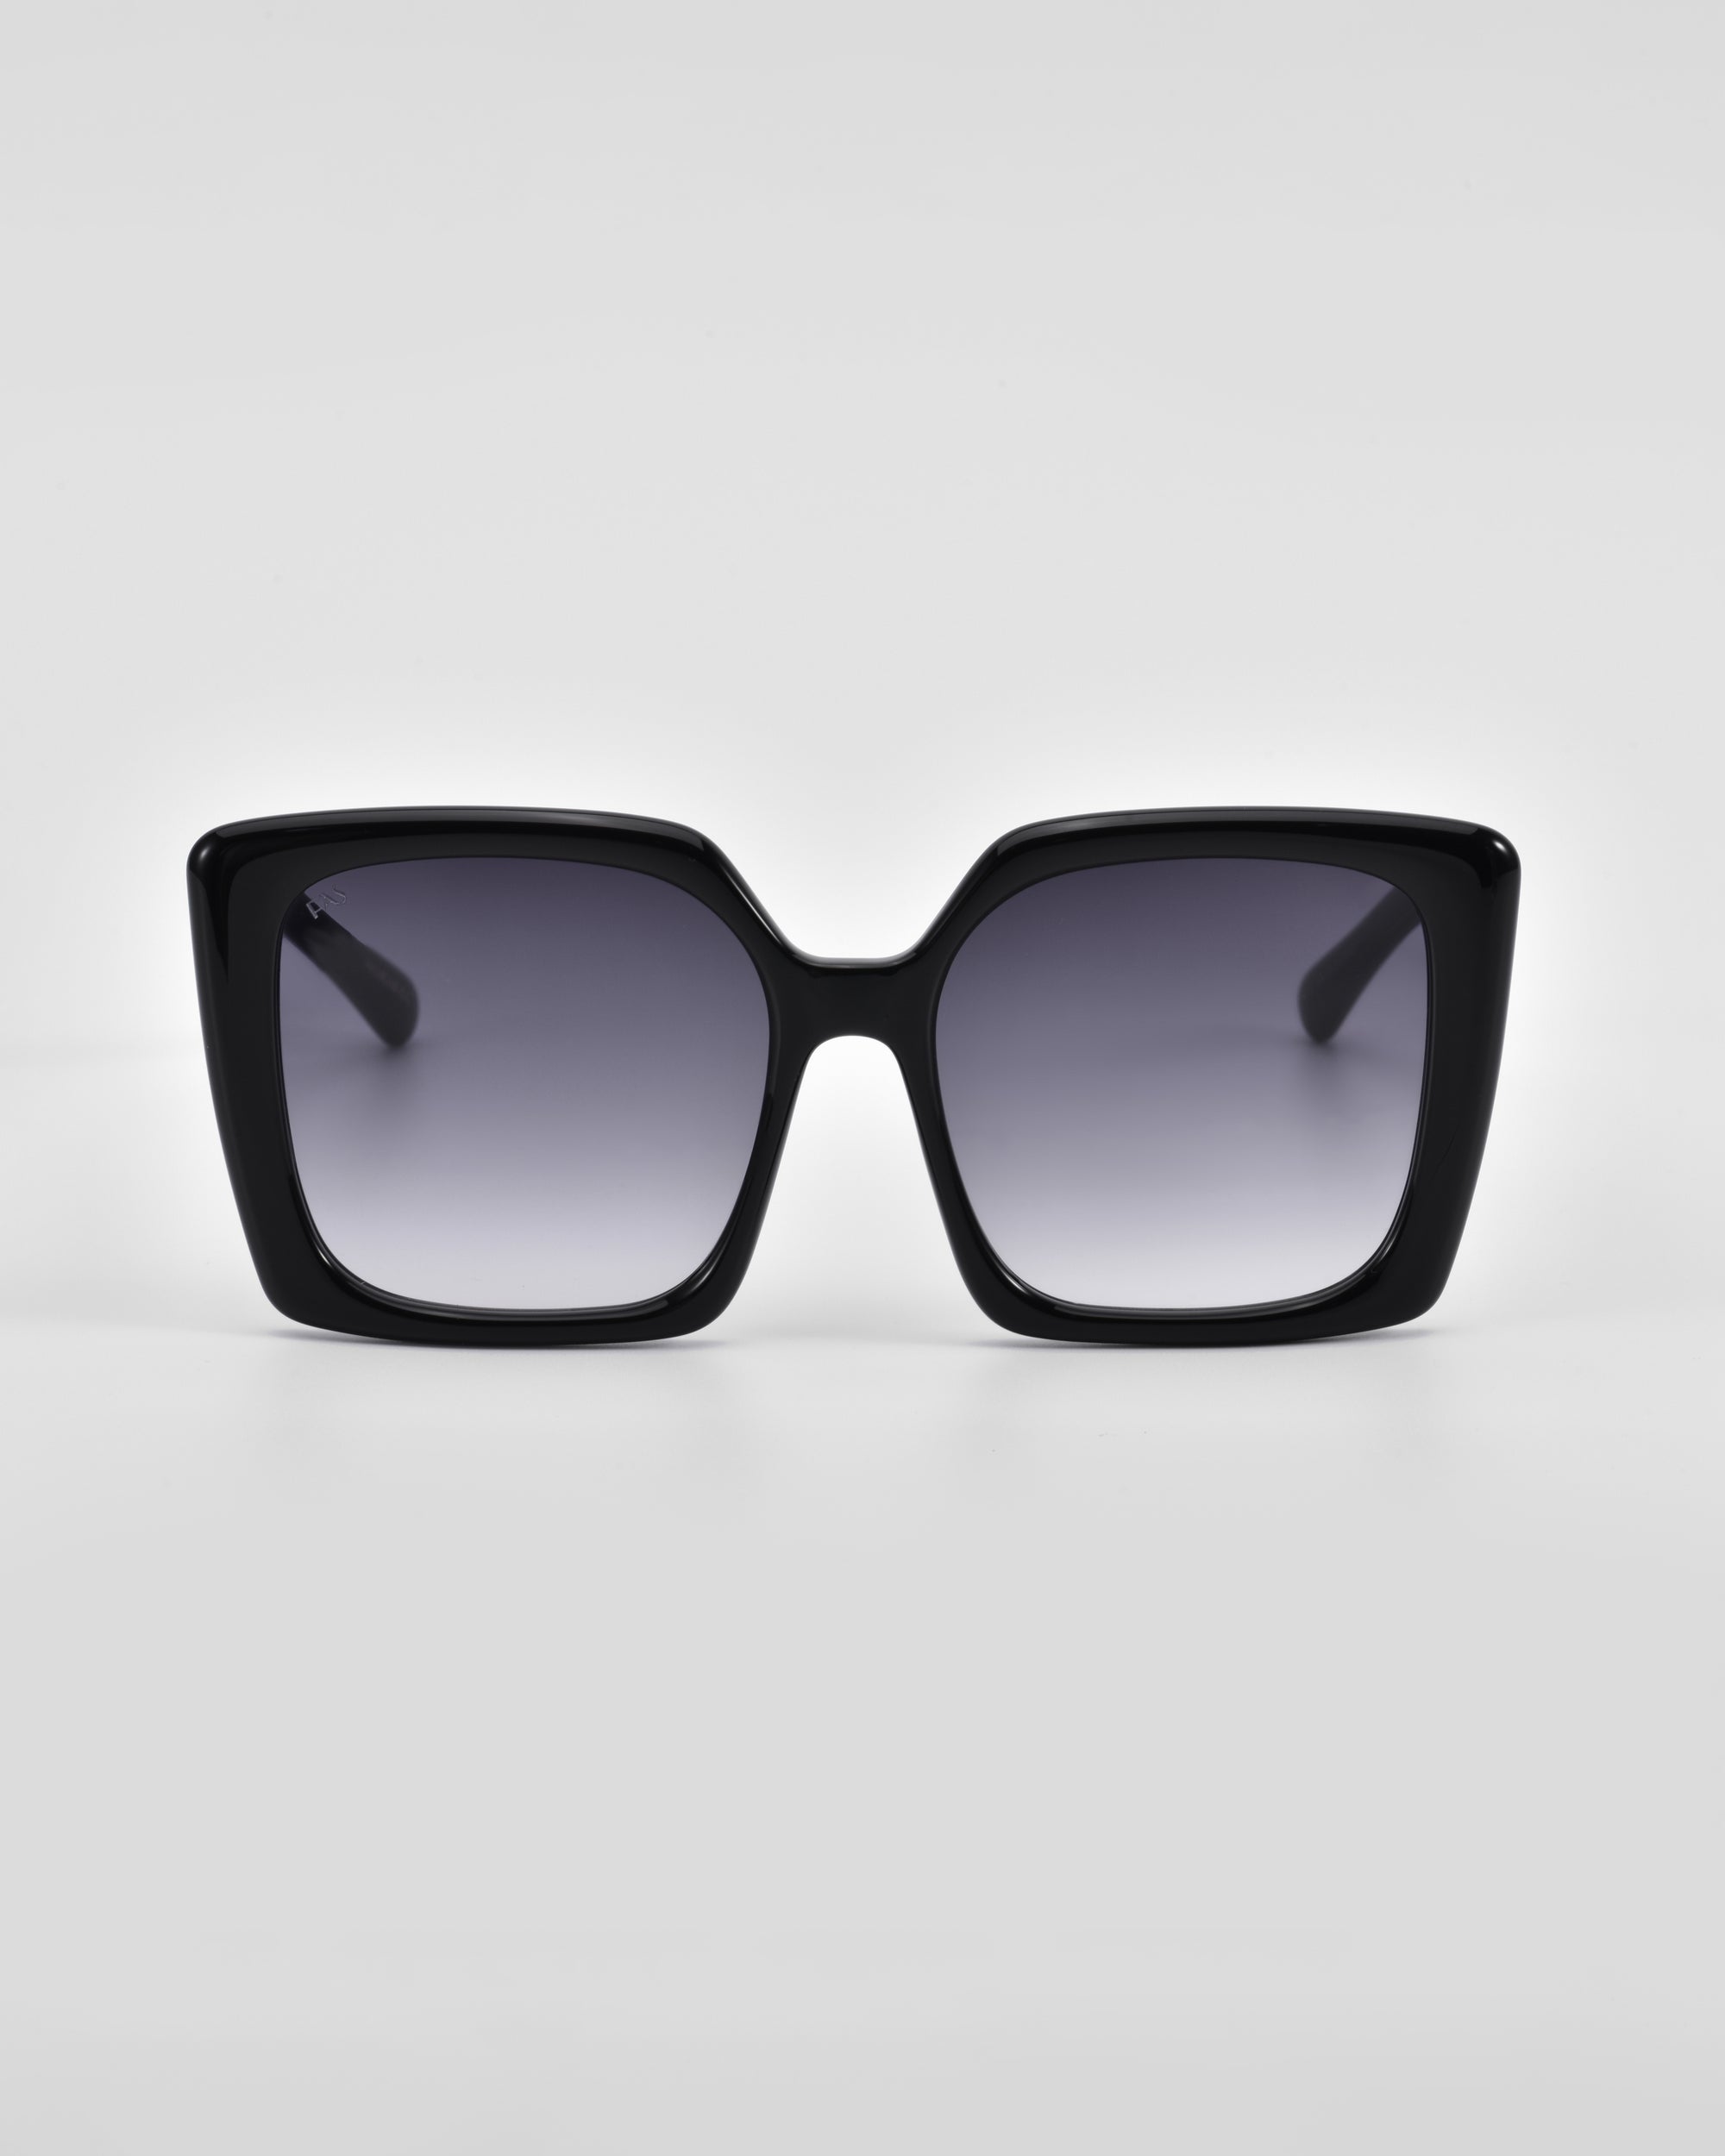 A pair of black oversized square Eos sunglasses with dark tinted lenses and classic temple round details by For Art&#39;s Sake®. The glasses are facing forward, showcasing the full frame and lens design against a plain white background.